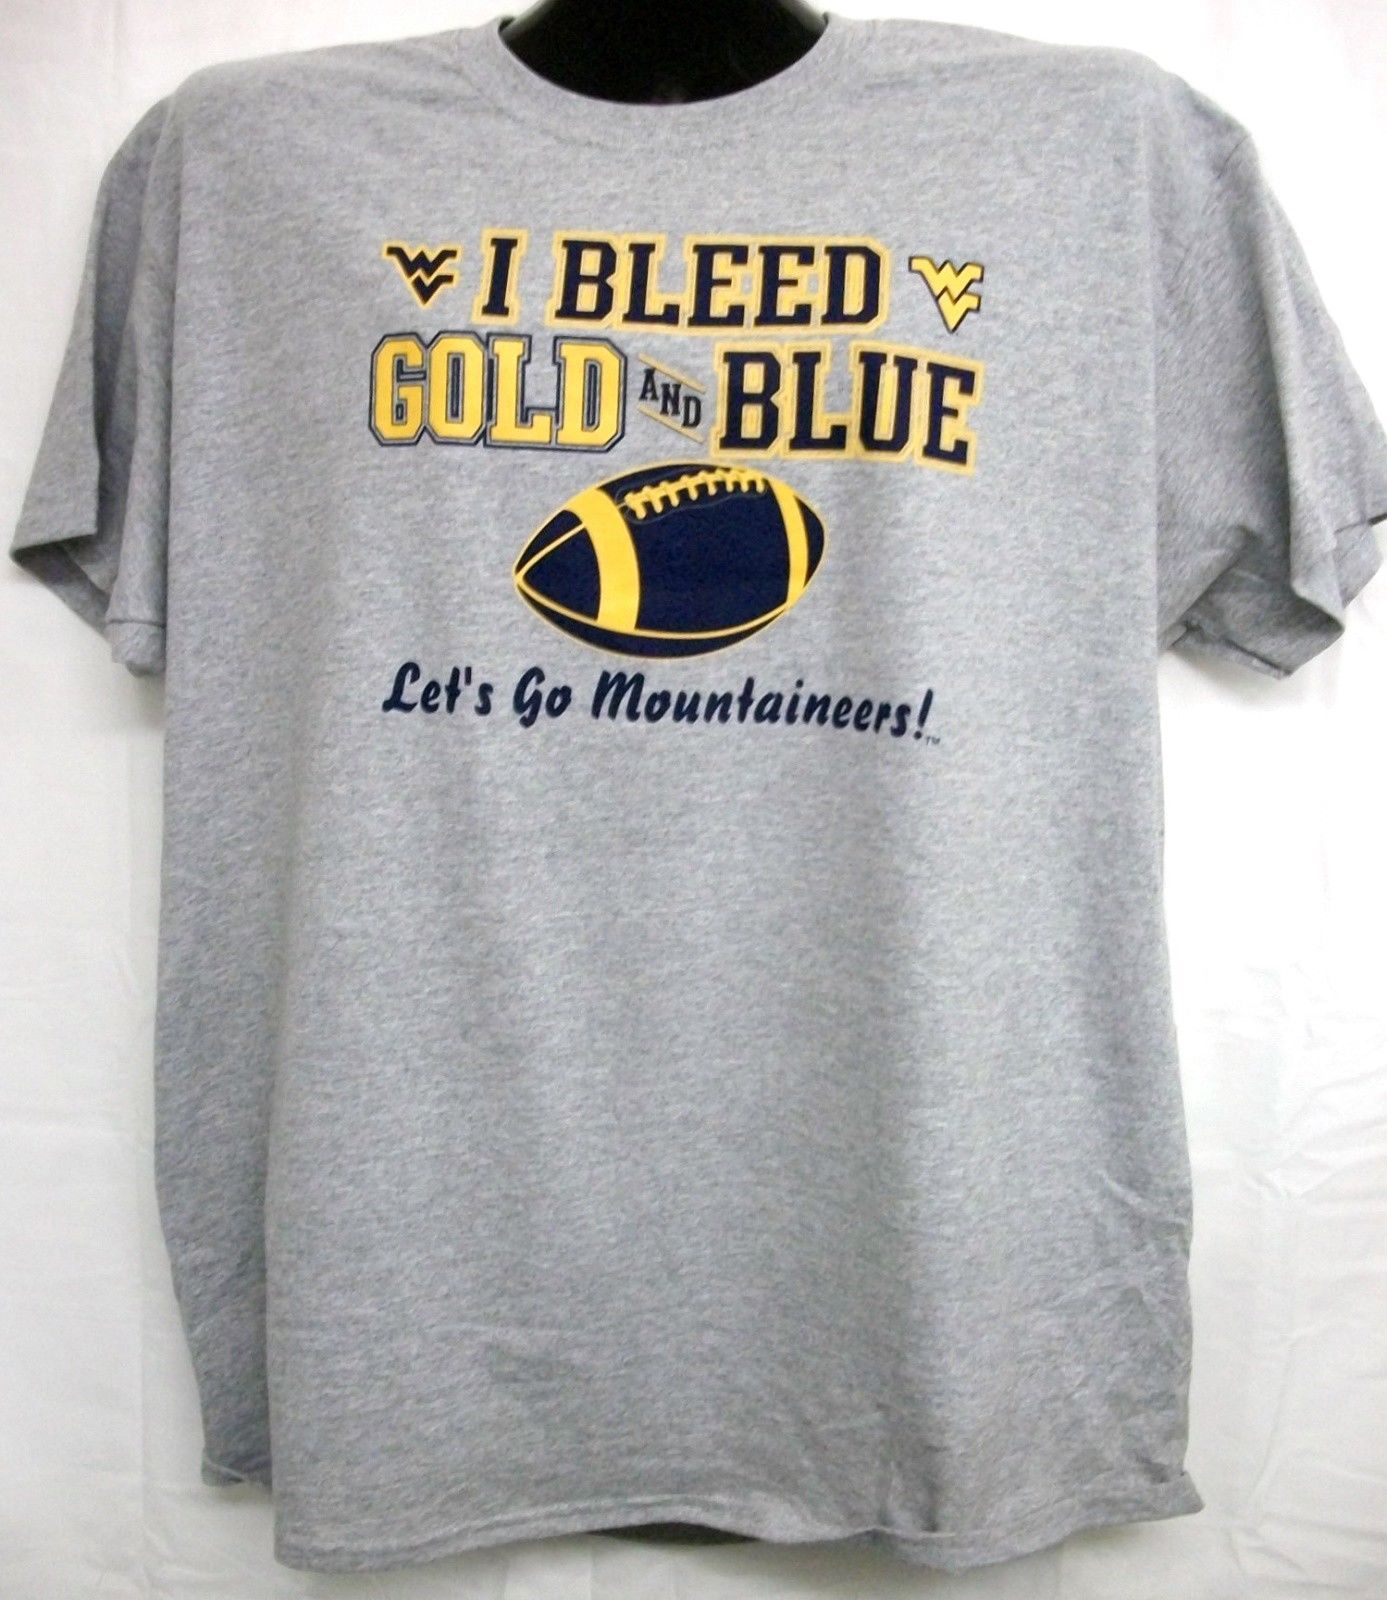 I Bleed Gold and Blue West Virginia Mountaineer's Shirt Large - $16.83